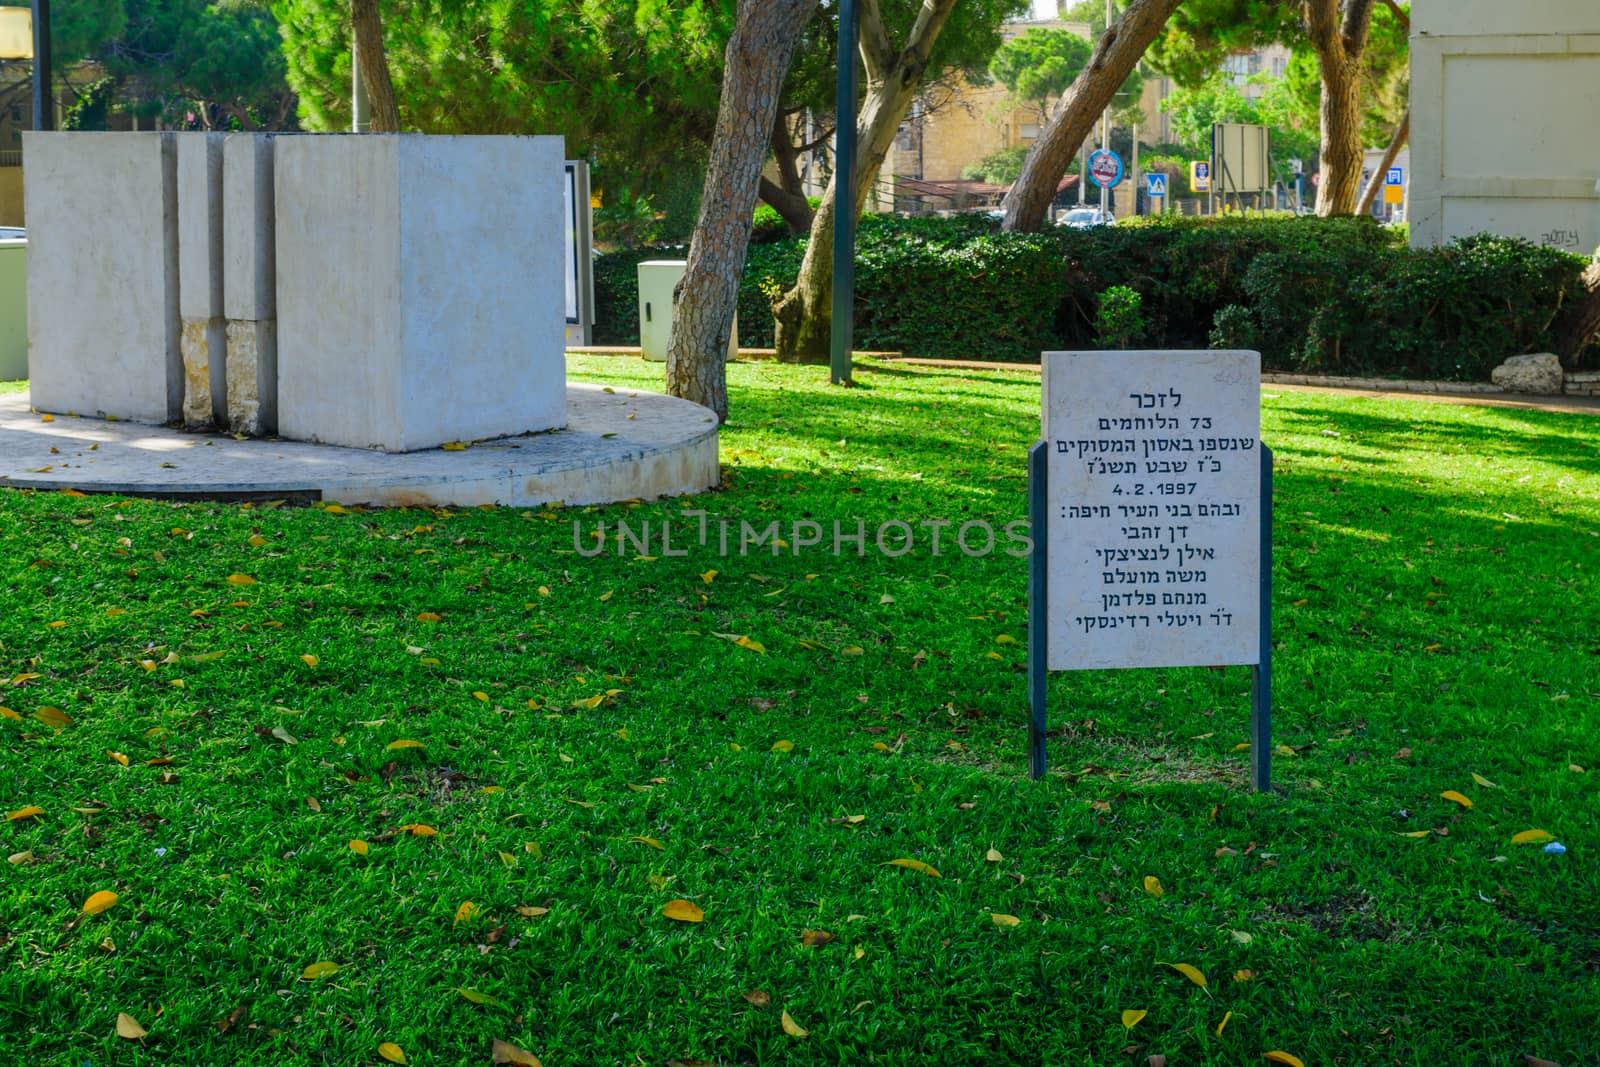 HAIFA, ISRAEL - SEPTEMBER 20, 2016: Memorial for the 73 soldiers that died in the helicopter crash in 1997, in Haifa, Israel